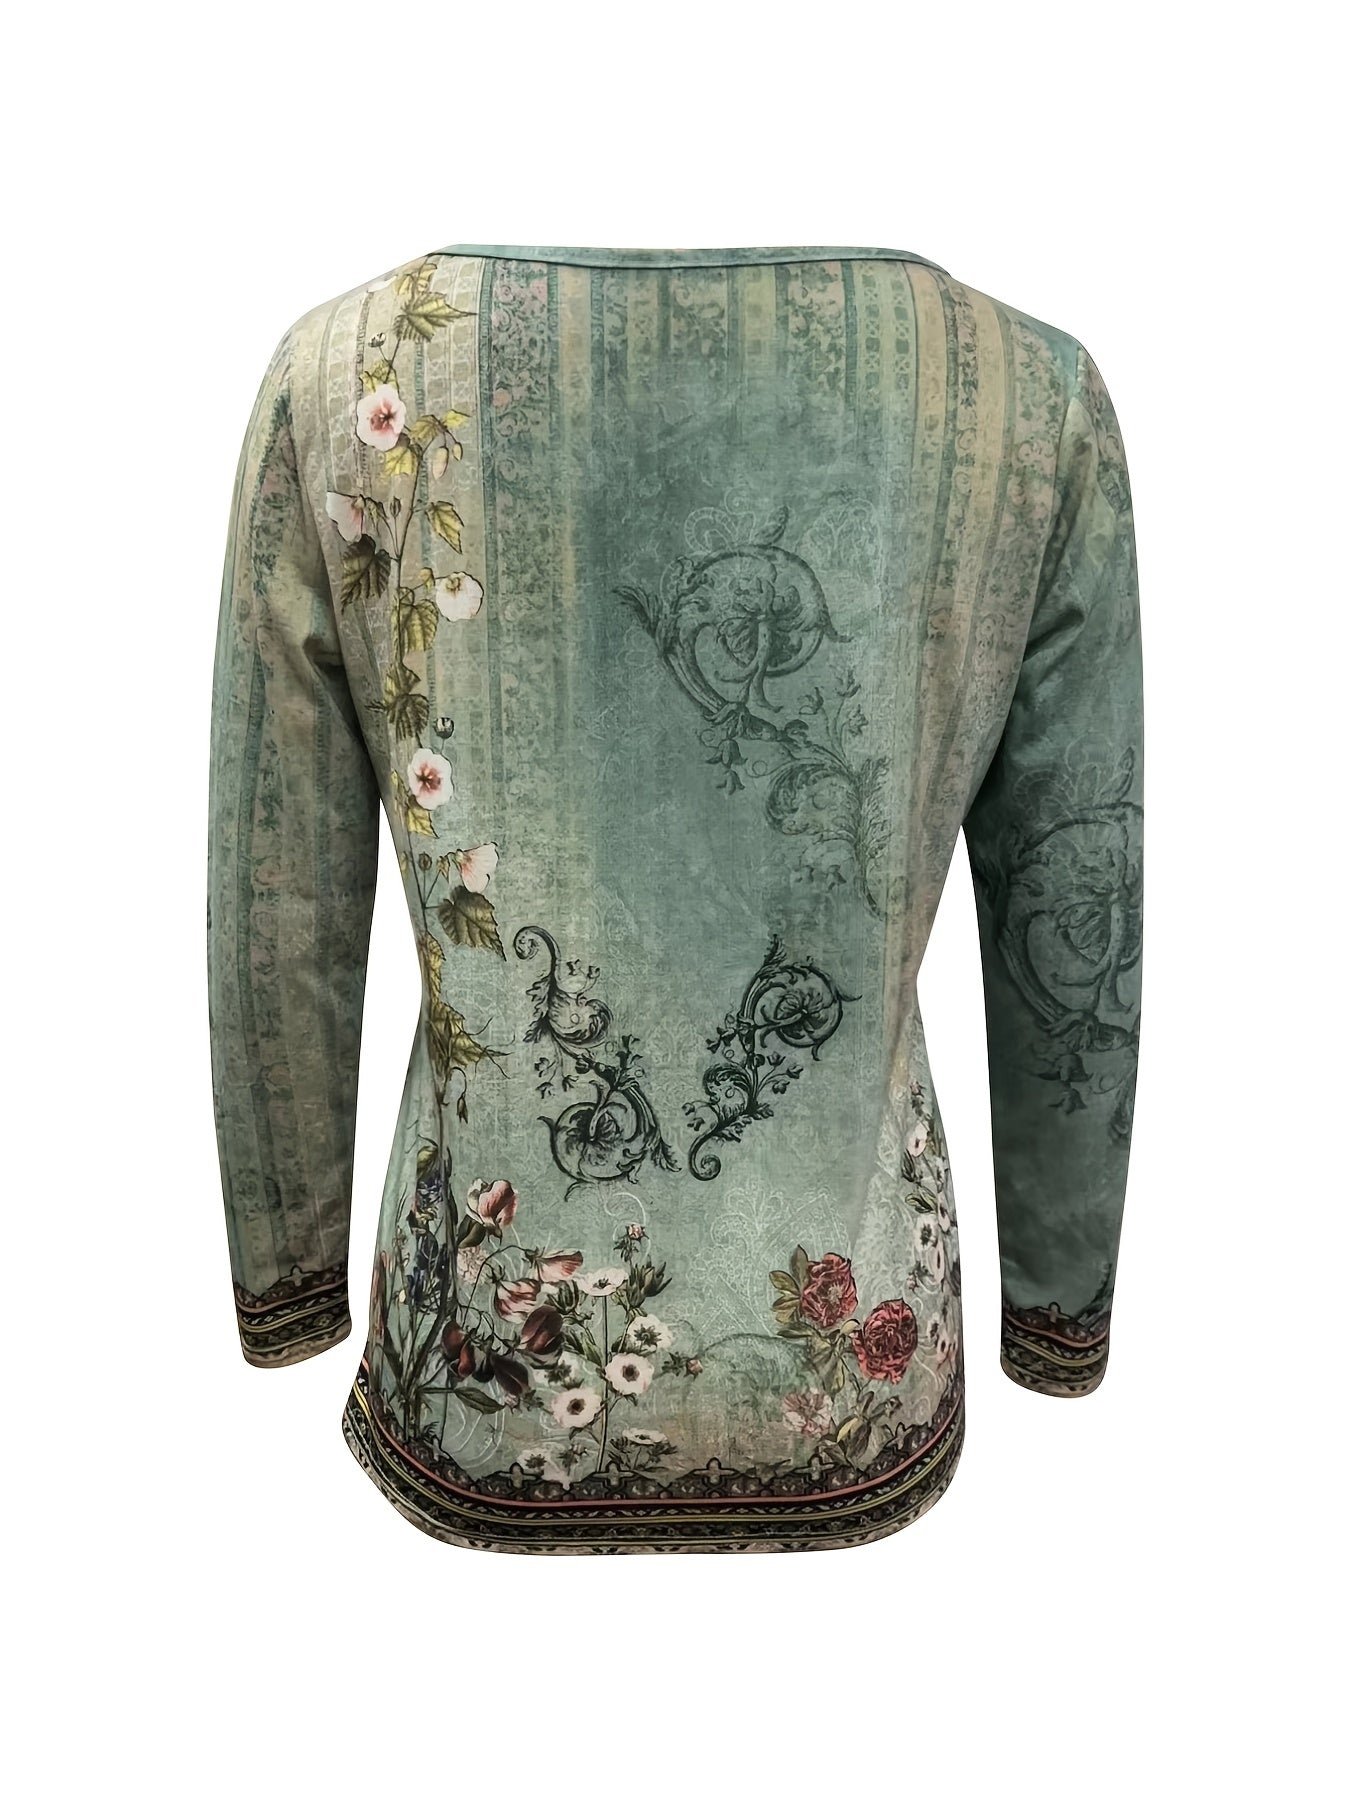 Floral Print Notch Neck T-Shirt, Casual Long Sleeve Top For Spring & Fall, Women's Clothing